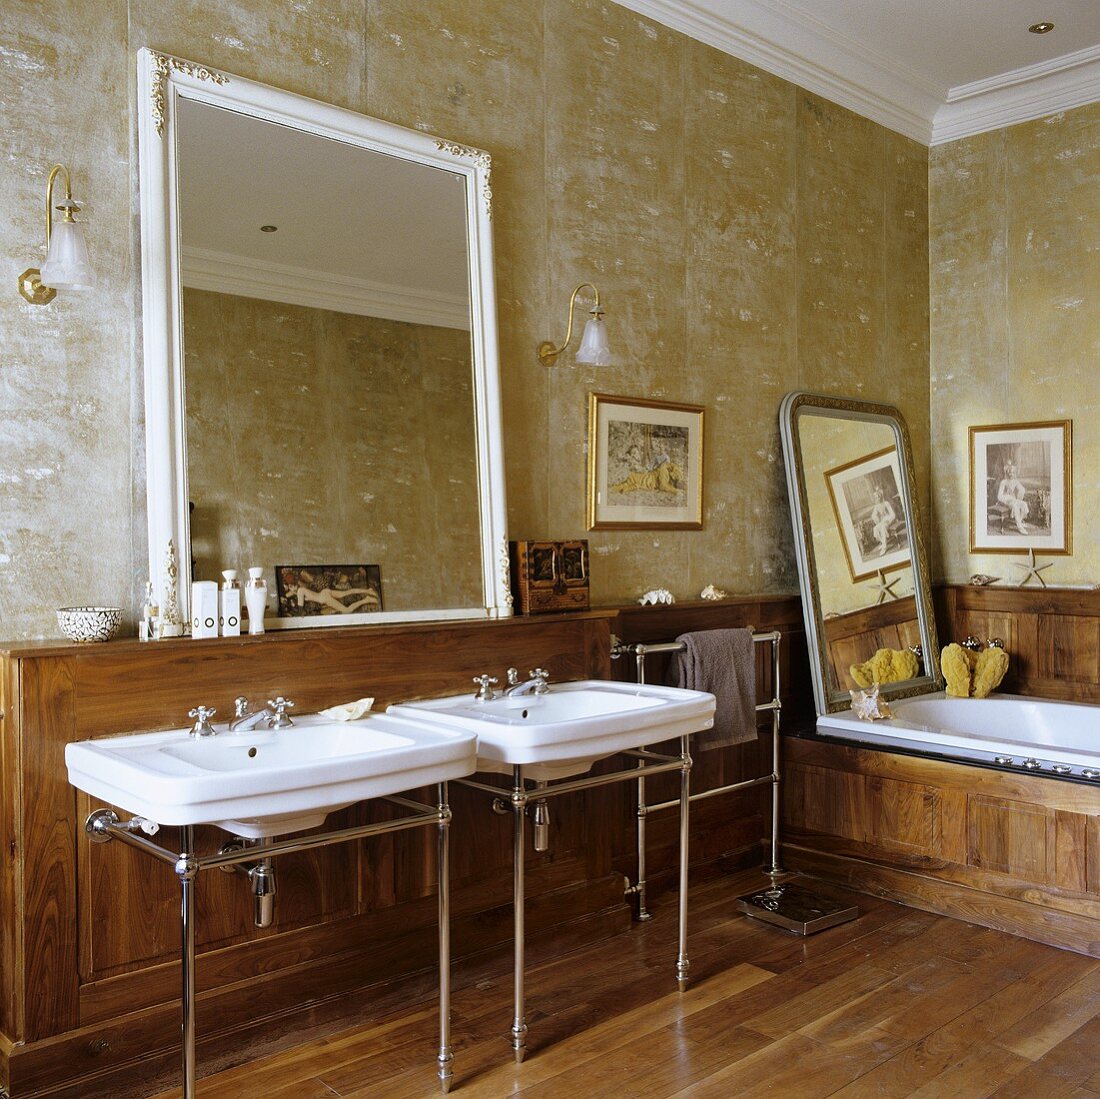 An antique bathroom with two wash basins and a mirror hung on a gold-painted wall above wood panelling